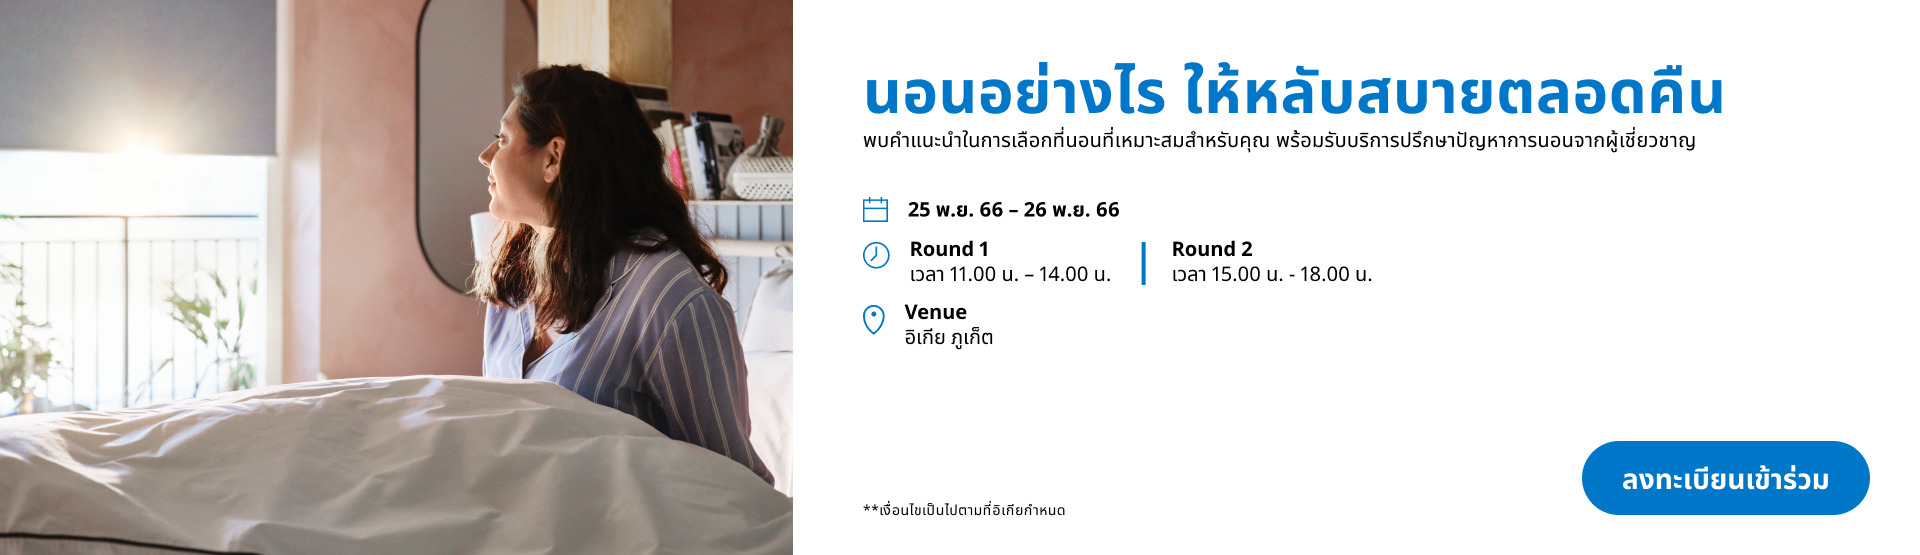 IKEA Family Thailand - Learn How To Dress Your Bed